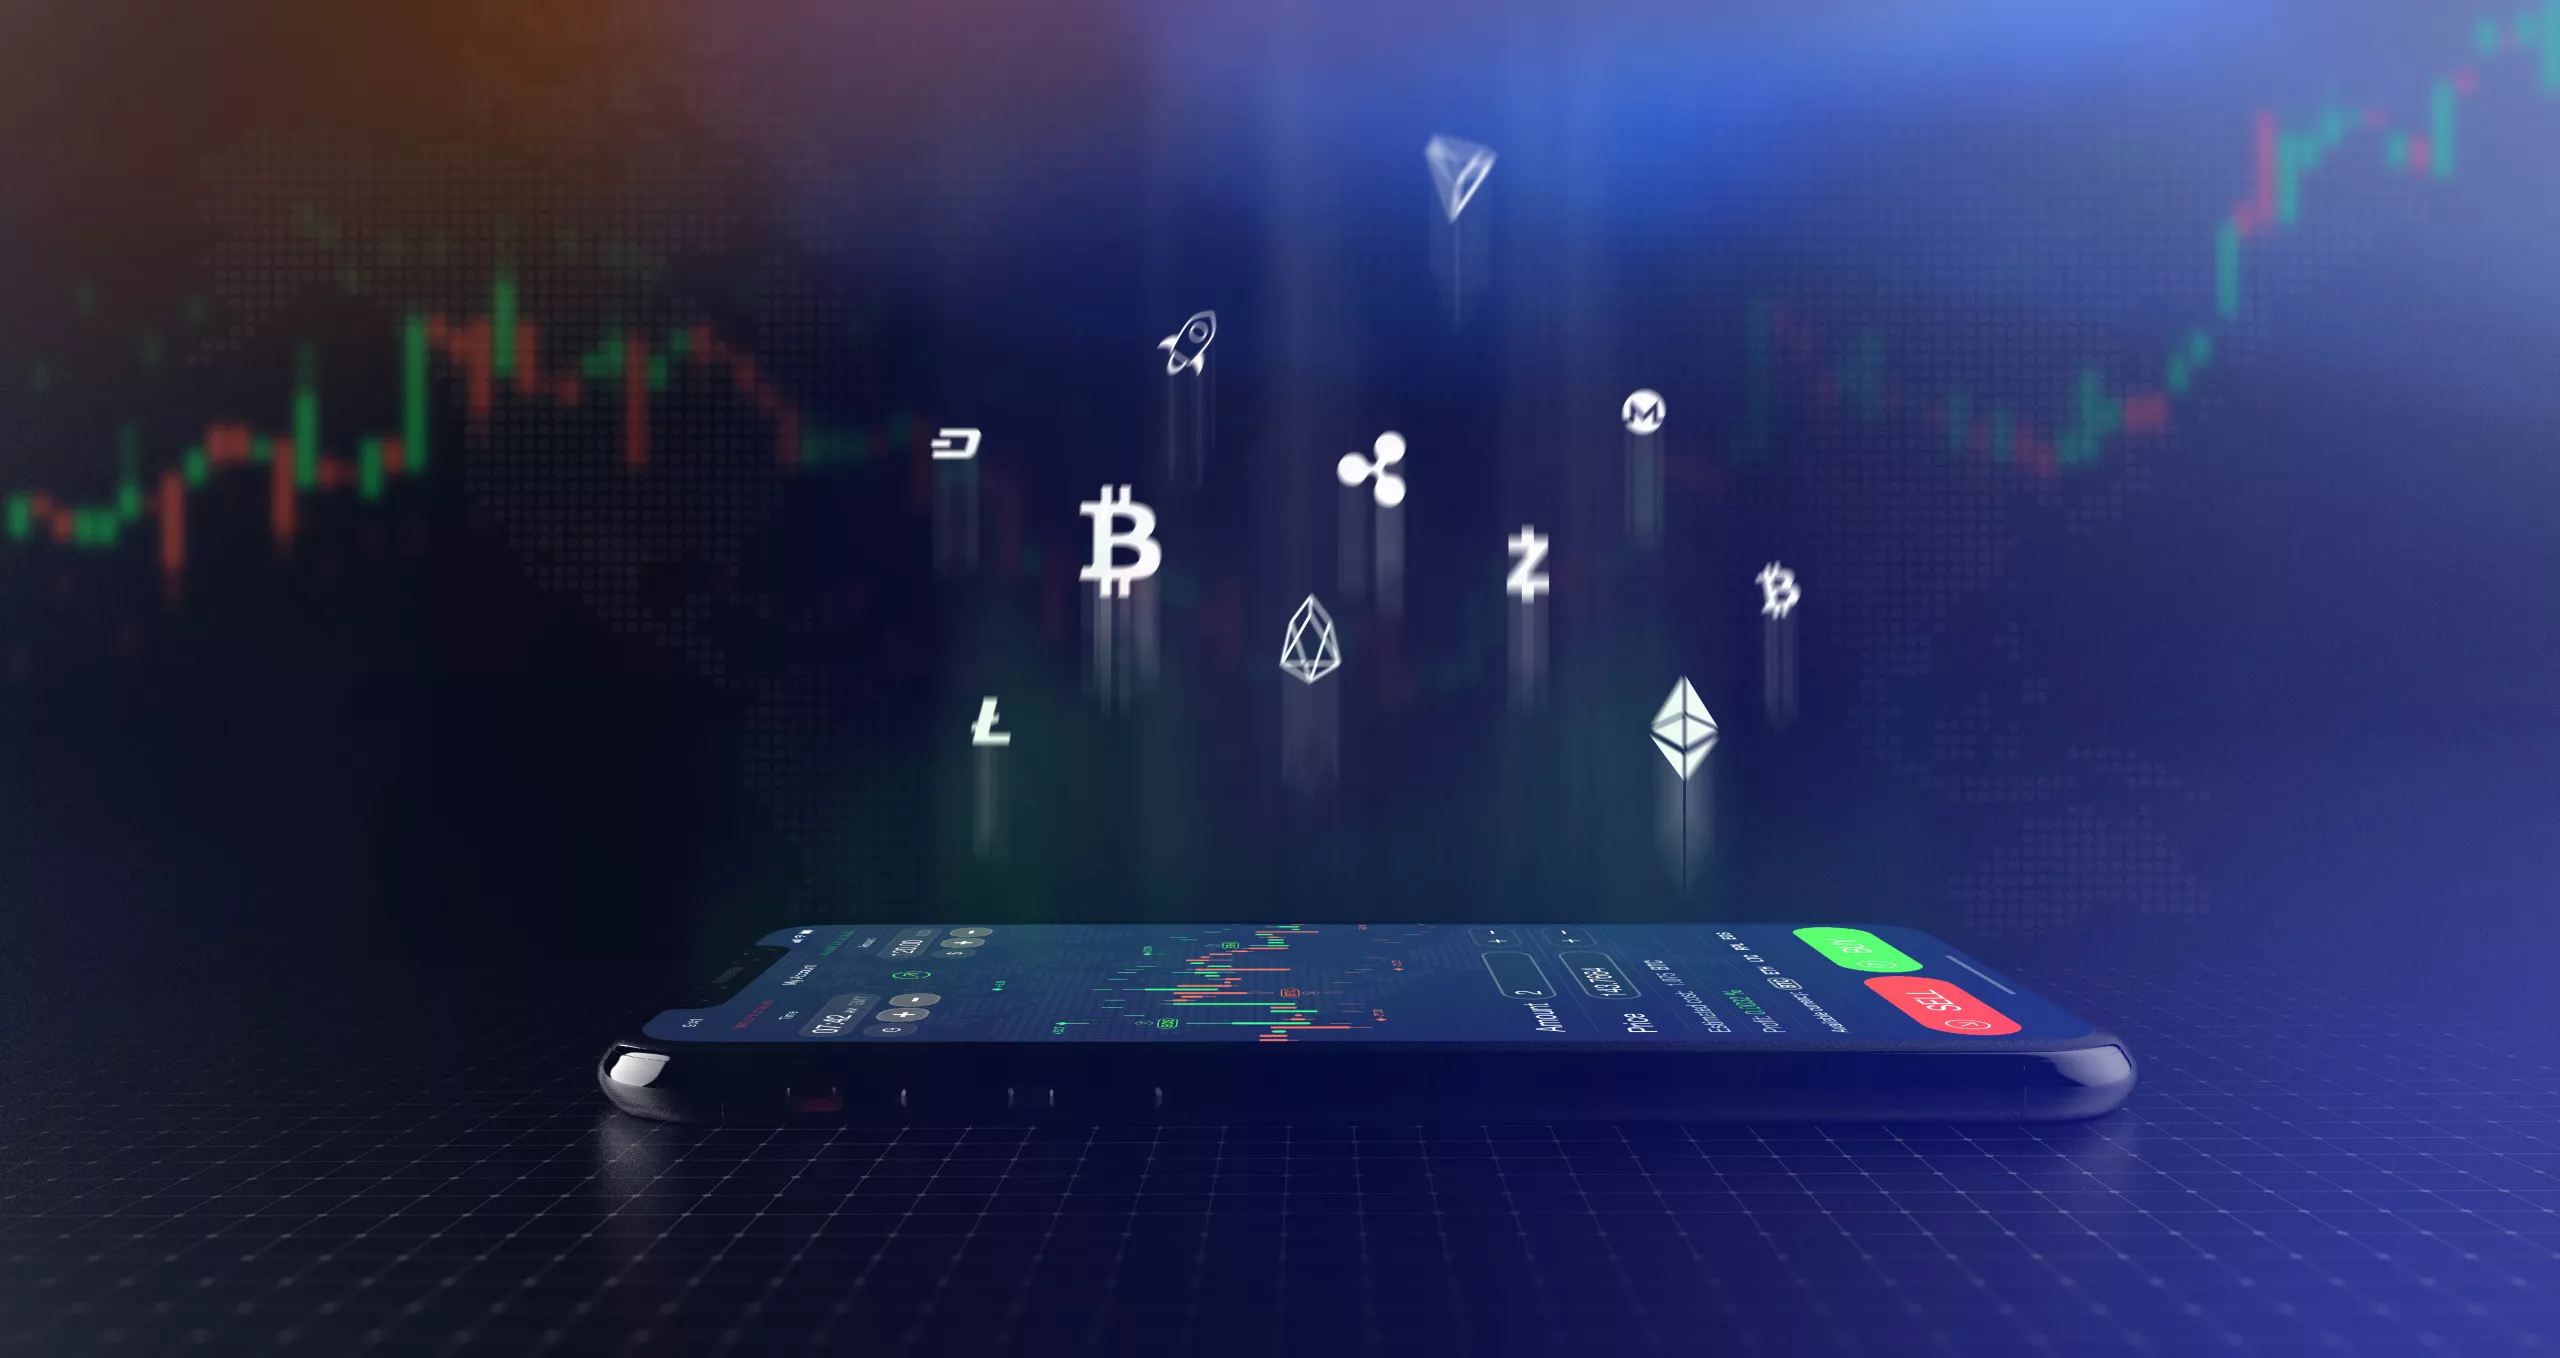 Futuristic stock exchange scene with crypto currency icons